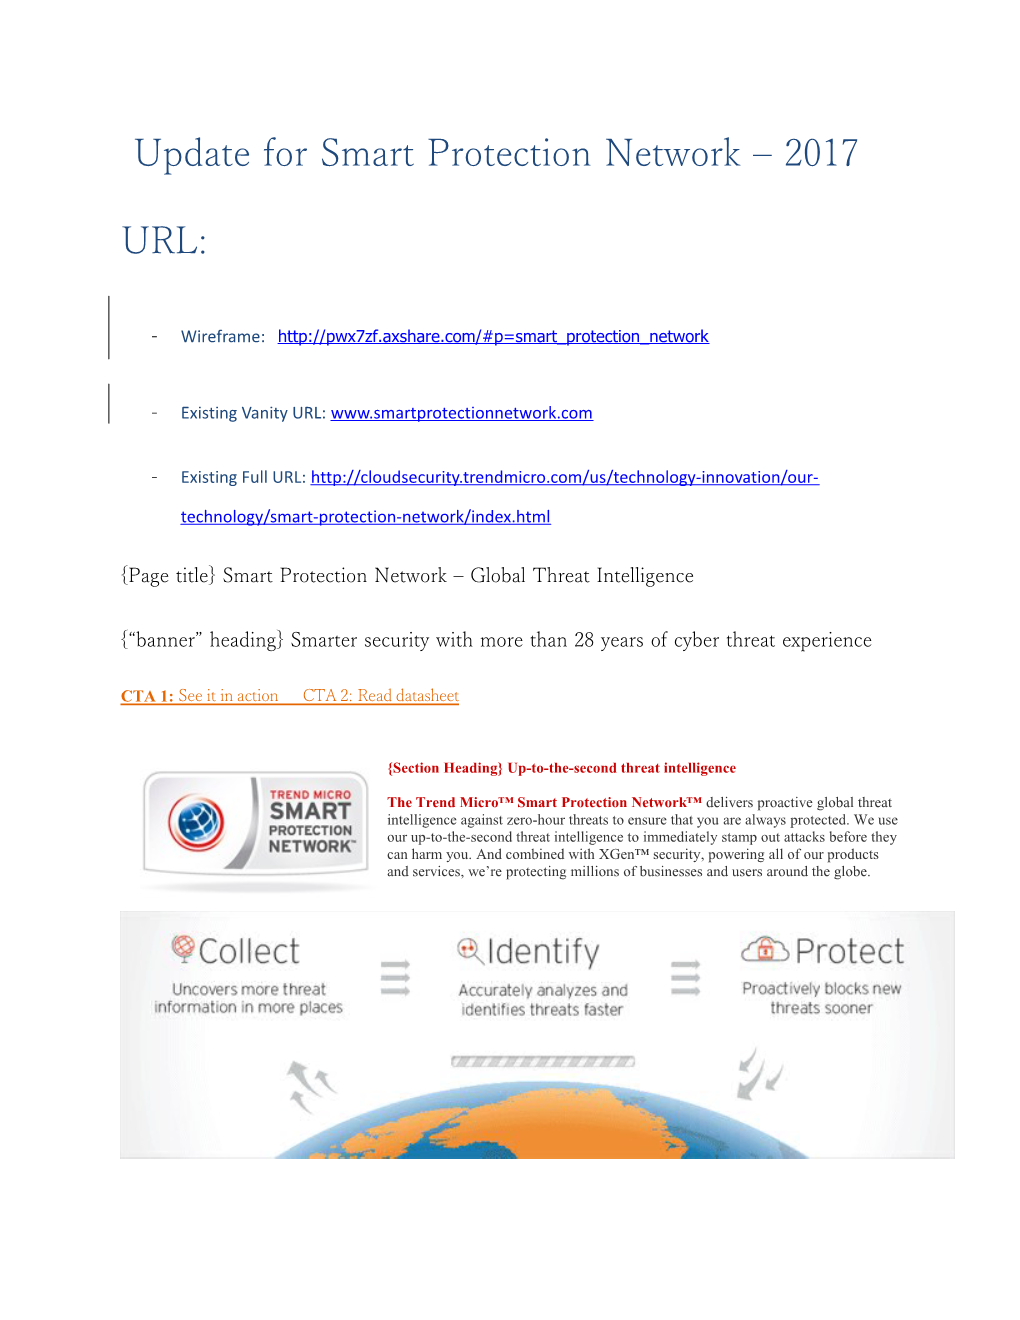 Update for Smart Protection Network 2017